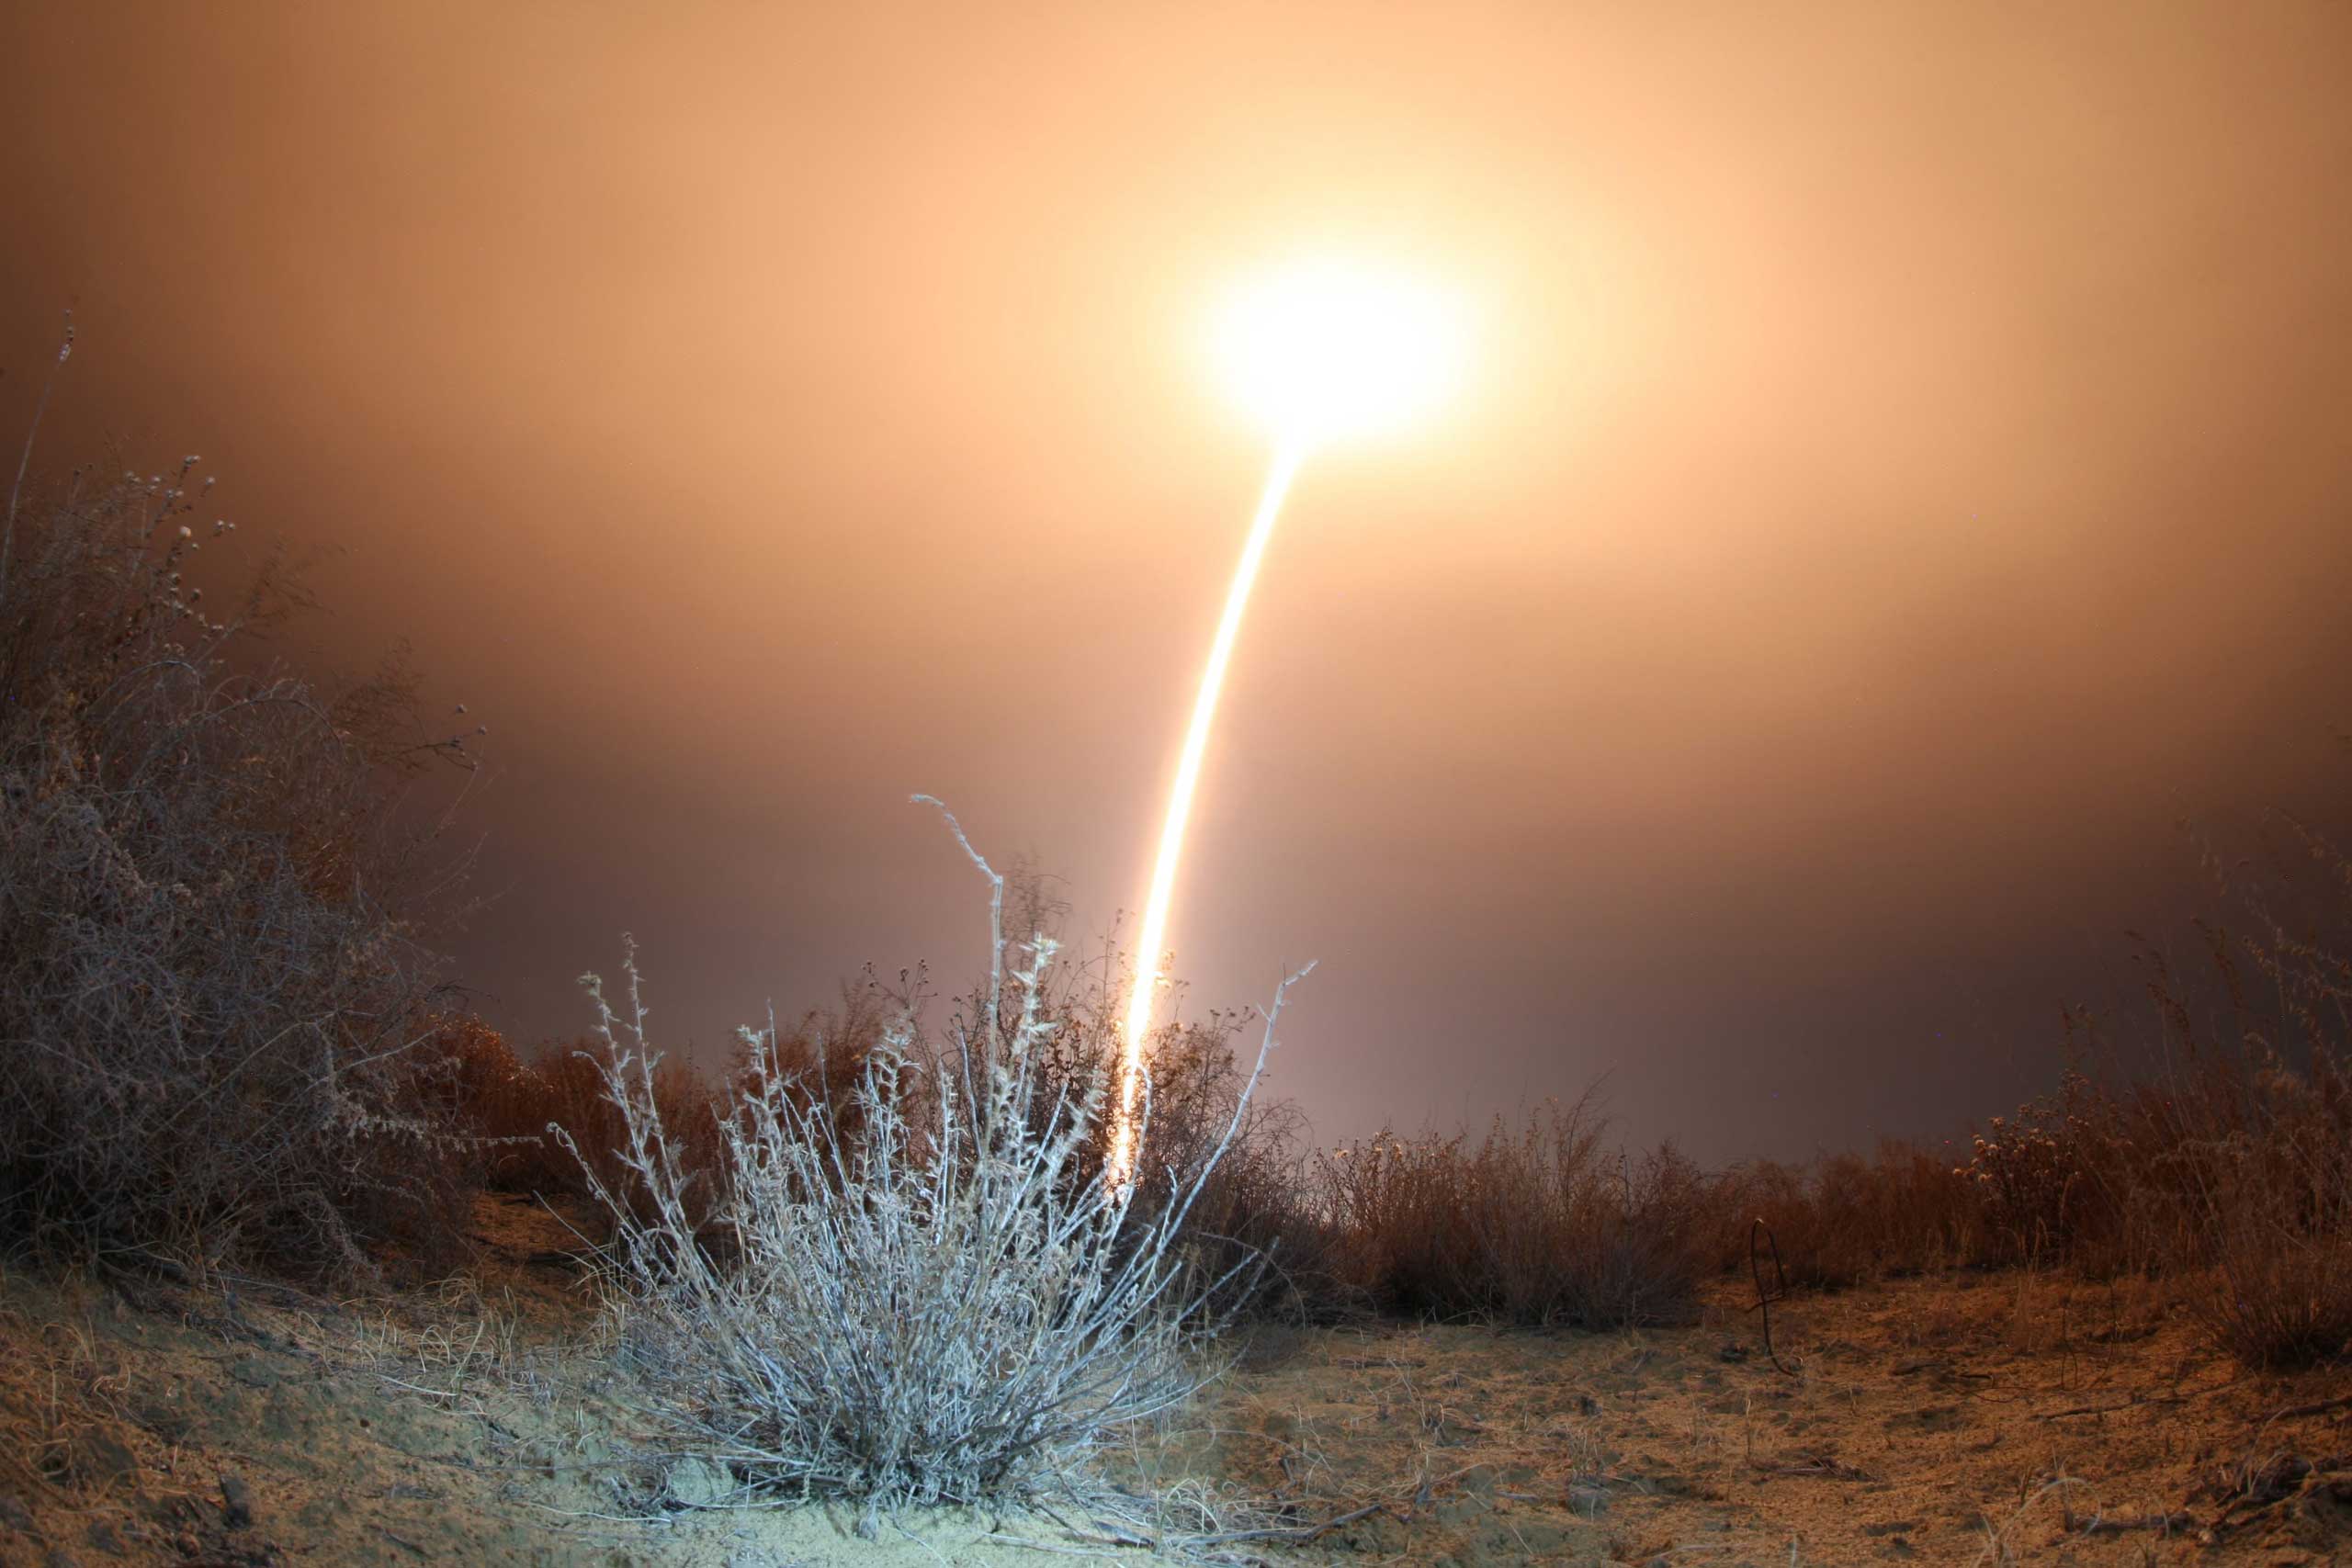 The Soyuz TMA-15 M blast off from Baikonur cosmodrome, Kazakhstan, early 24 Nov. 24, 2014, carrying members of the mission.